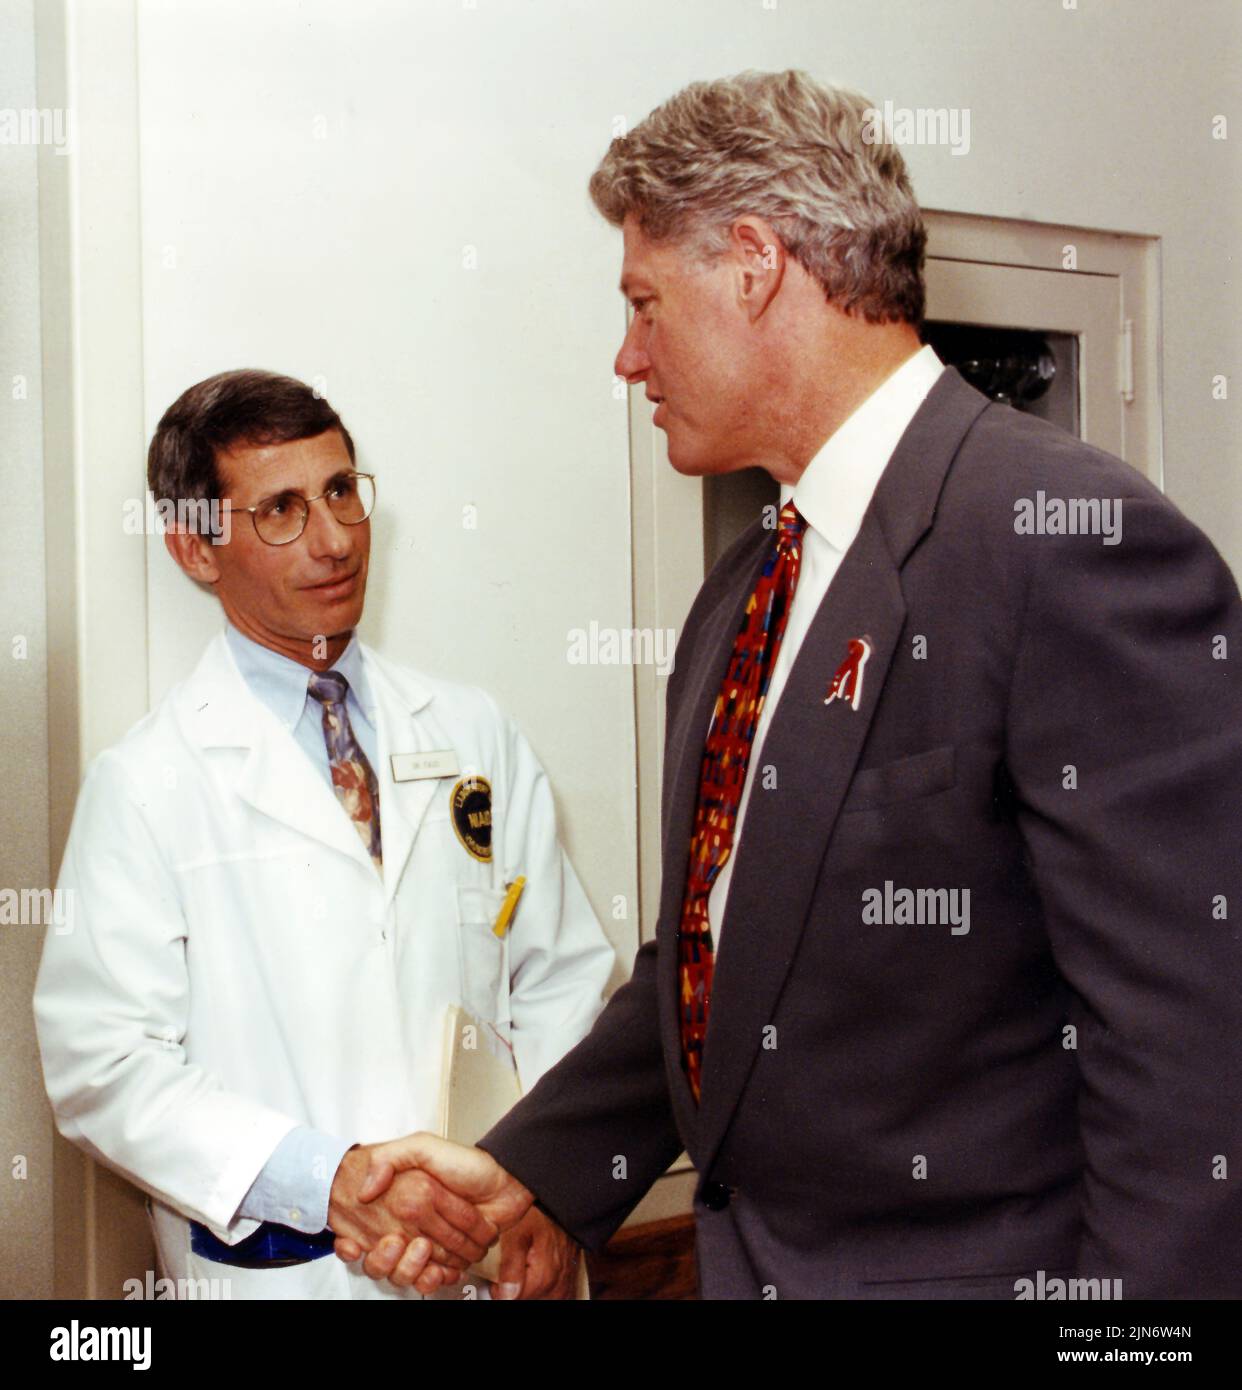 Anthony Fauci and Bill Clinton 1997 Dr. Anthony Fauci shaking hands with President Bill Clinton, 1997. Credit: NIAID Stock Photo